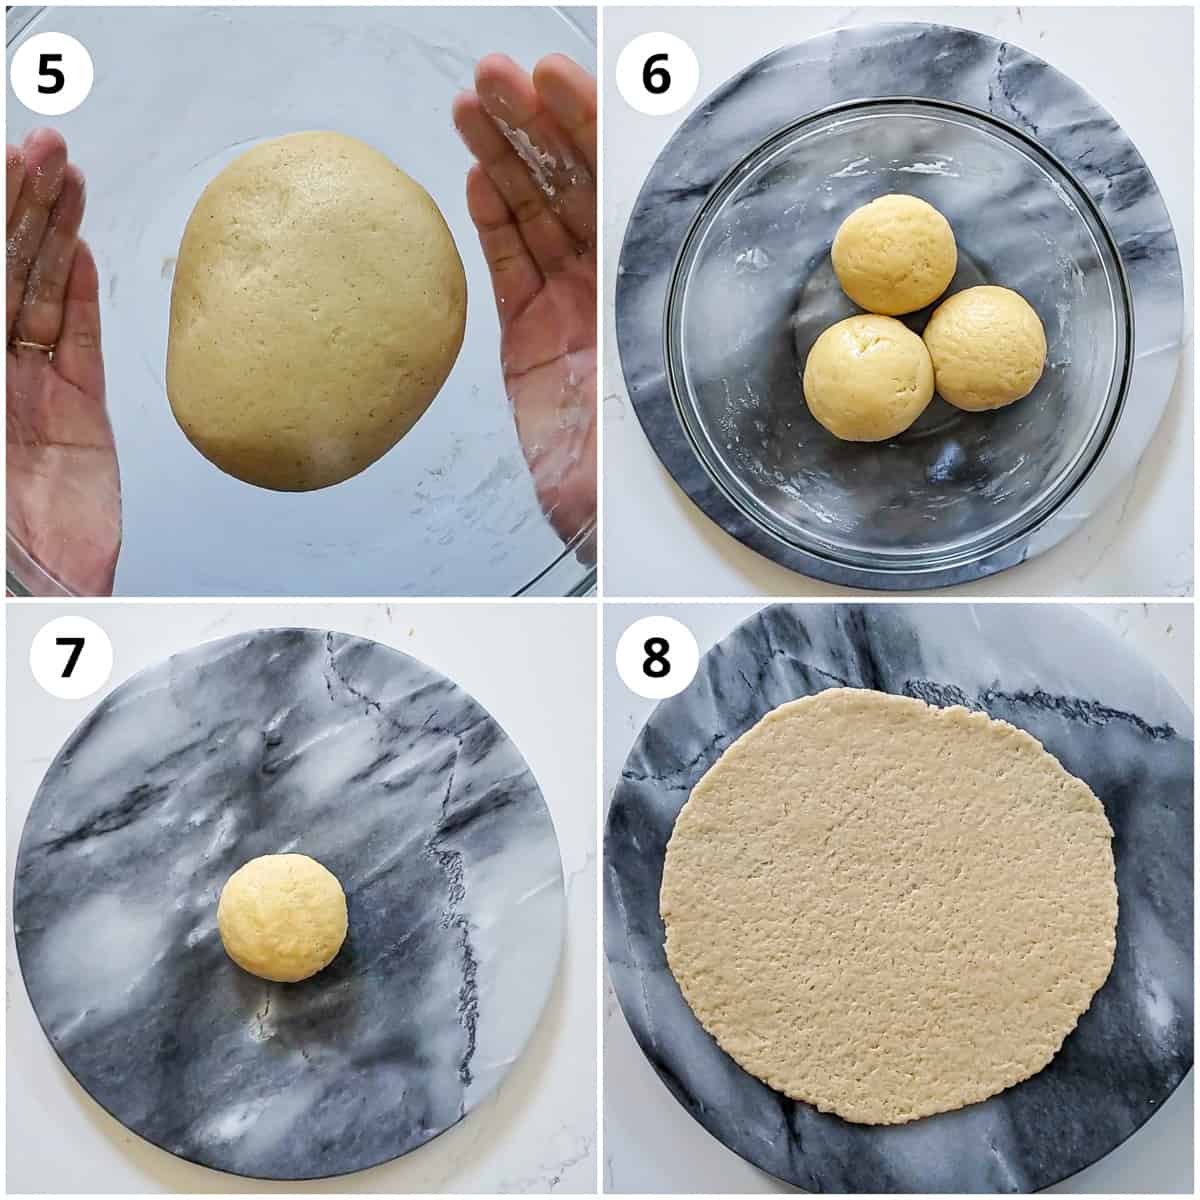 Steps for dividing the shankarpali dough and rolling each part 